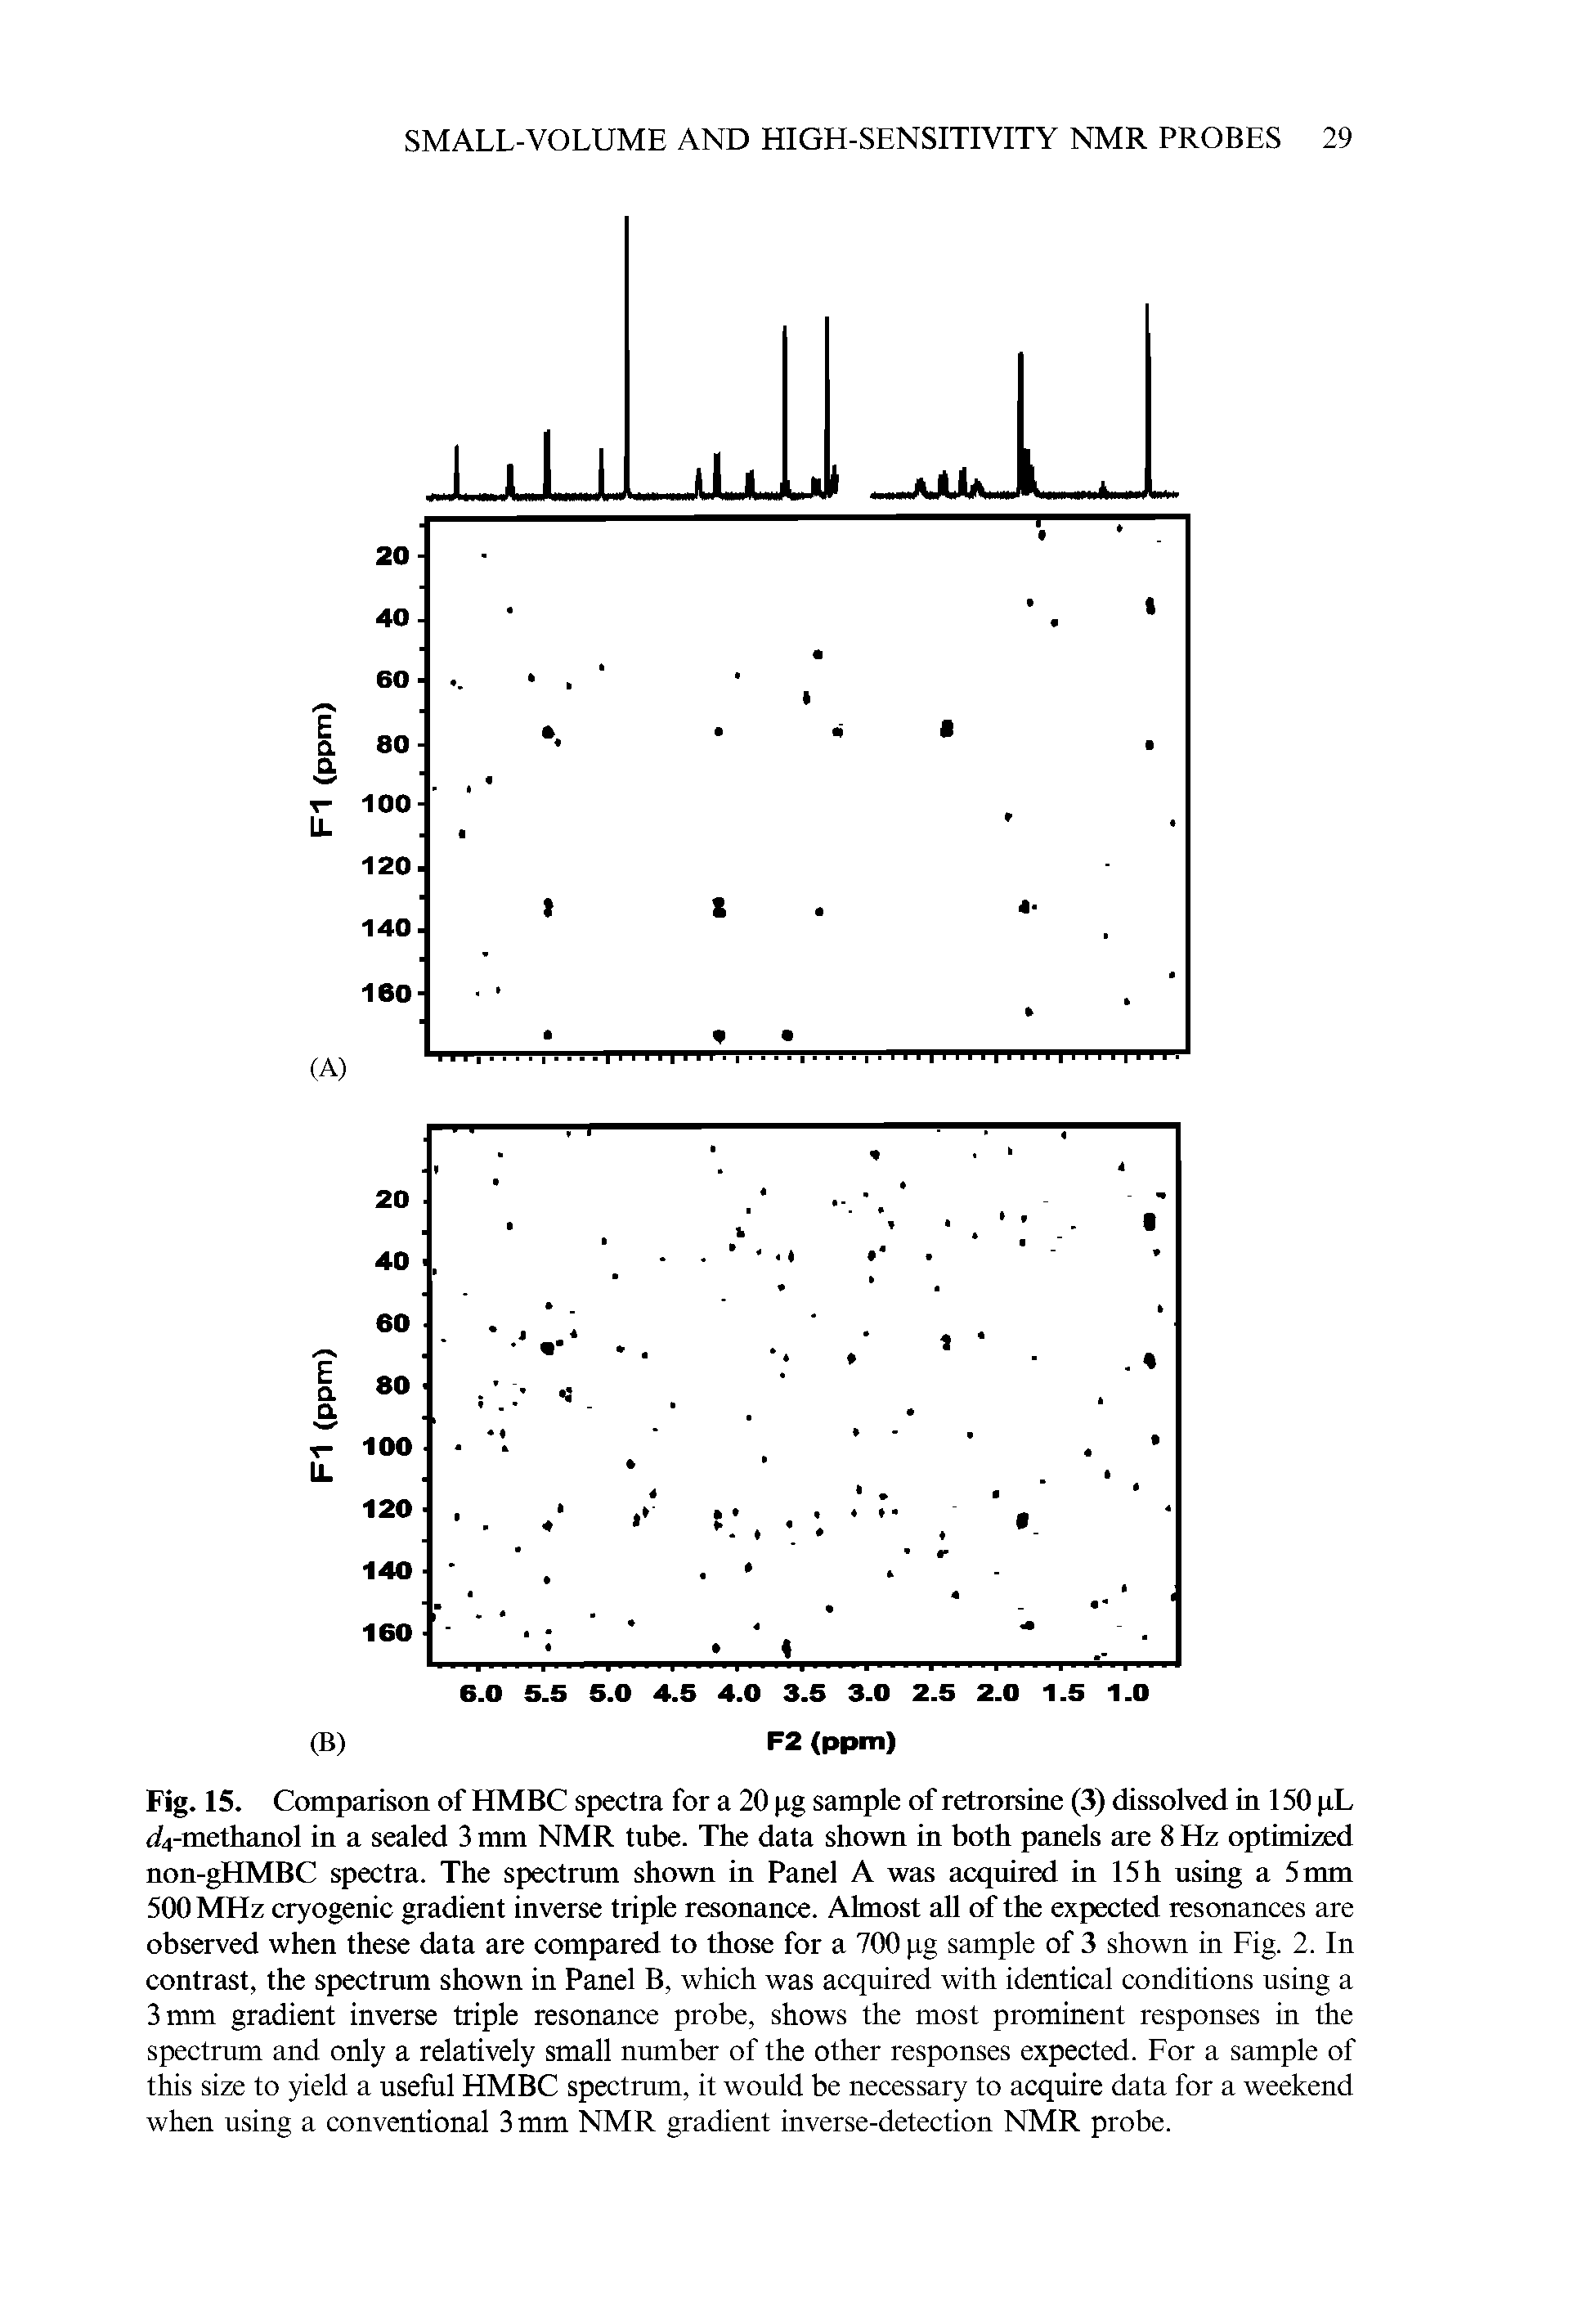 Fig. 15. Comparison of HMBC spectra for a 20 gg sample of retrorsine (3) dissolved in 150 pL rf4-metlianol in a sealed 3 mm NMR tube. The data shown in both panels are 8 Hz optimized non-gHMBC spectra. The spectrum shown in Panel A was acquired in 15 h using a 5 mm 500 MHz cryogenic gradient inverse triple resonance. Almost all of the expected resonances are observed when these data are compared to those for a 700 pg sample of 3 shown in Fig. 2. In contrast, the spectrum shown in Panel B, which was acquired with identical conditions using a 3 mm gradient inverse triple resonance probe, shows the most prominent responses in the spectrum and only a relatively small number of the other responses expected. For a sample of this size to yield a useful HMBC spectrum, it would be necessary to acquire data for a weekend when using a conventional 3 mm NMR gradient inverse-detection NMR probe.